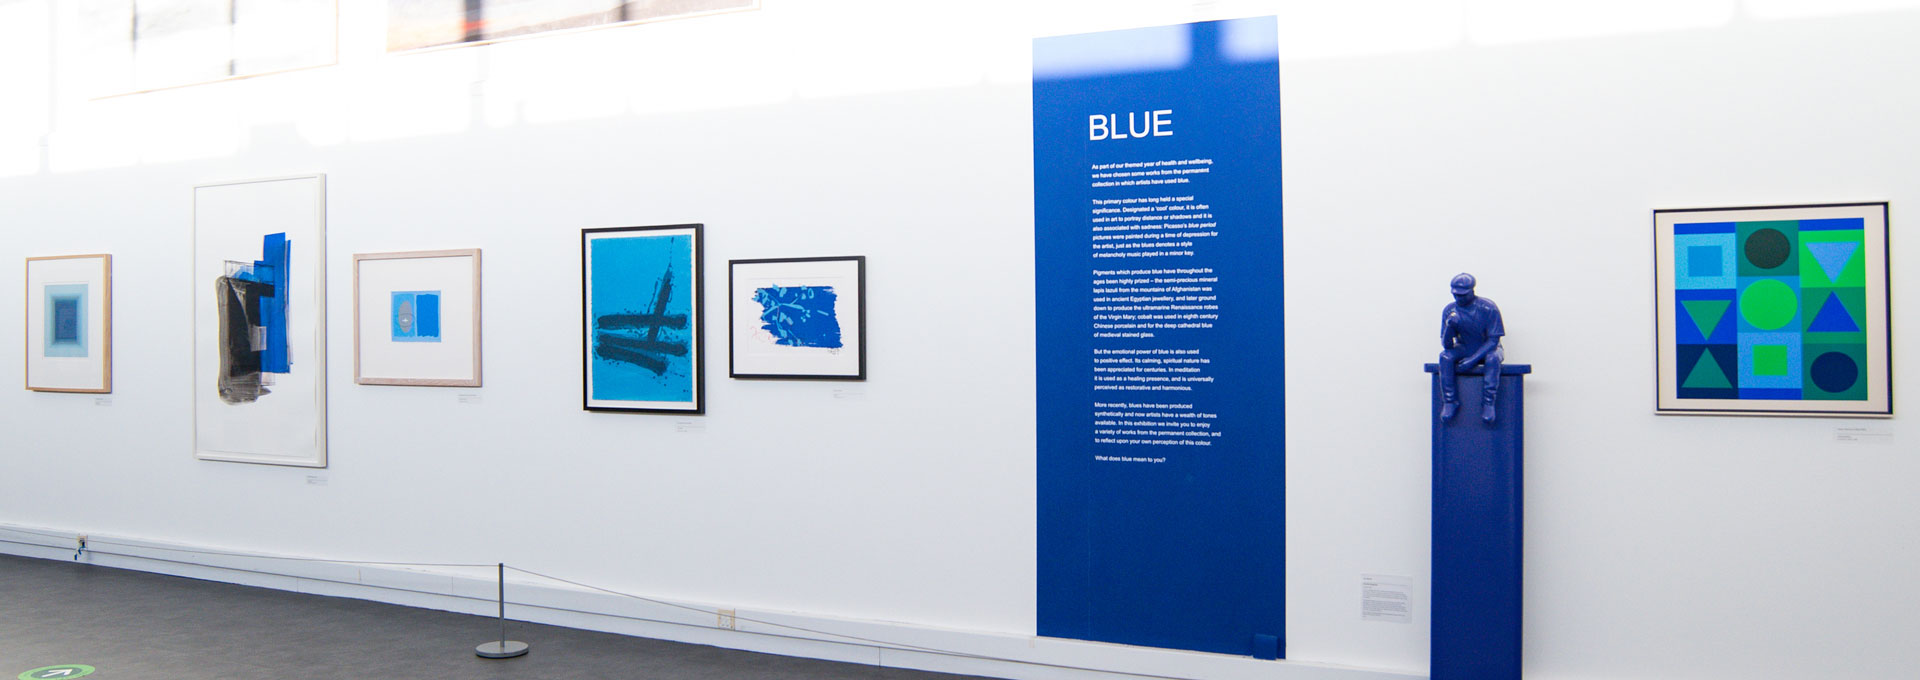 A white wall with artwork displayed on it and a blue sculpture